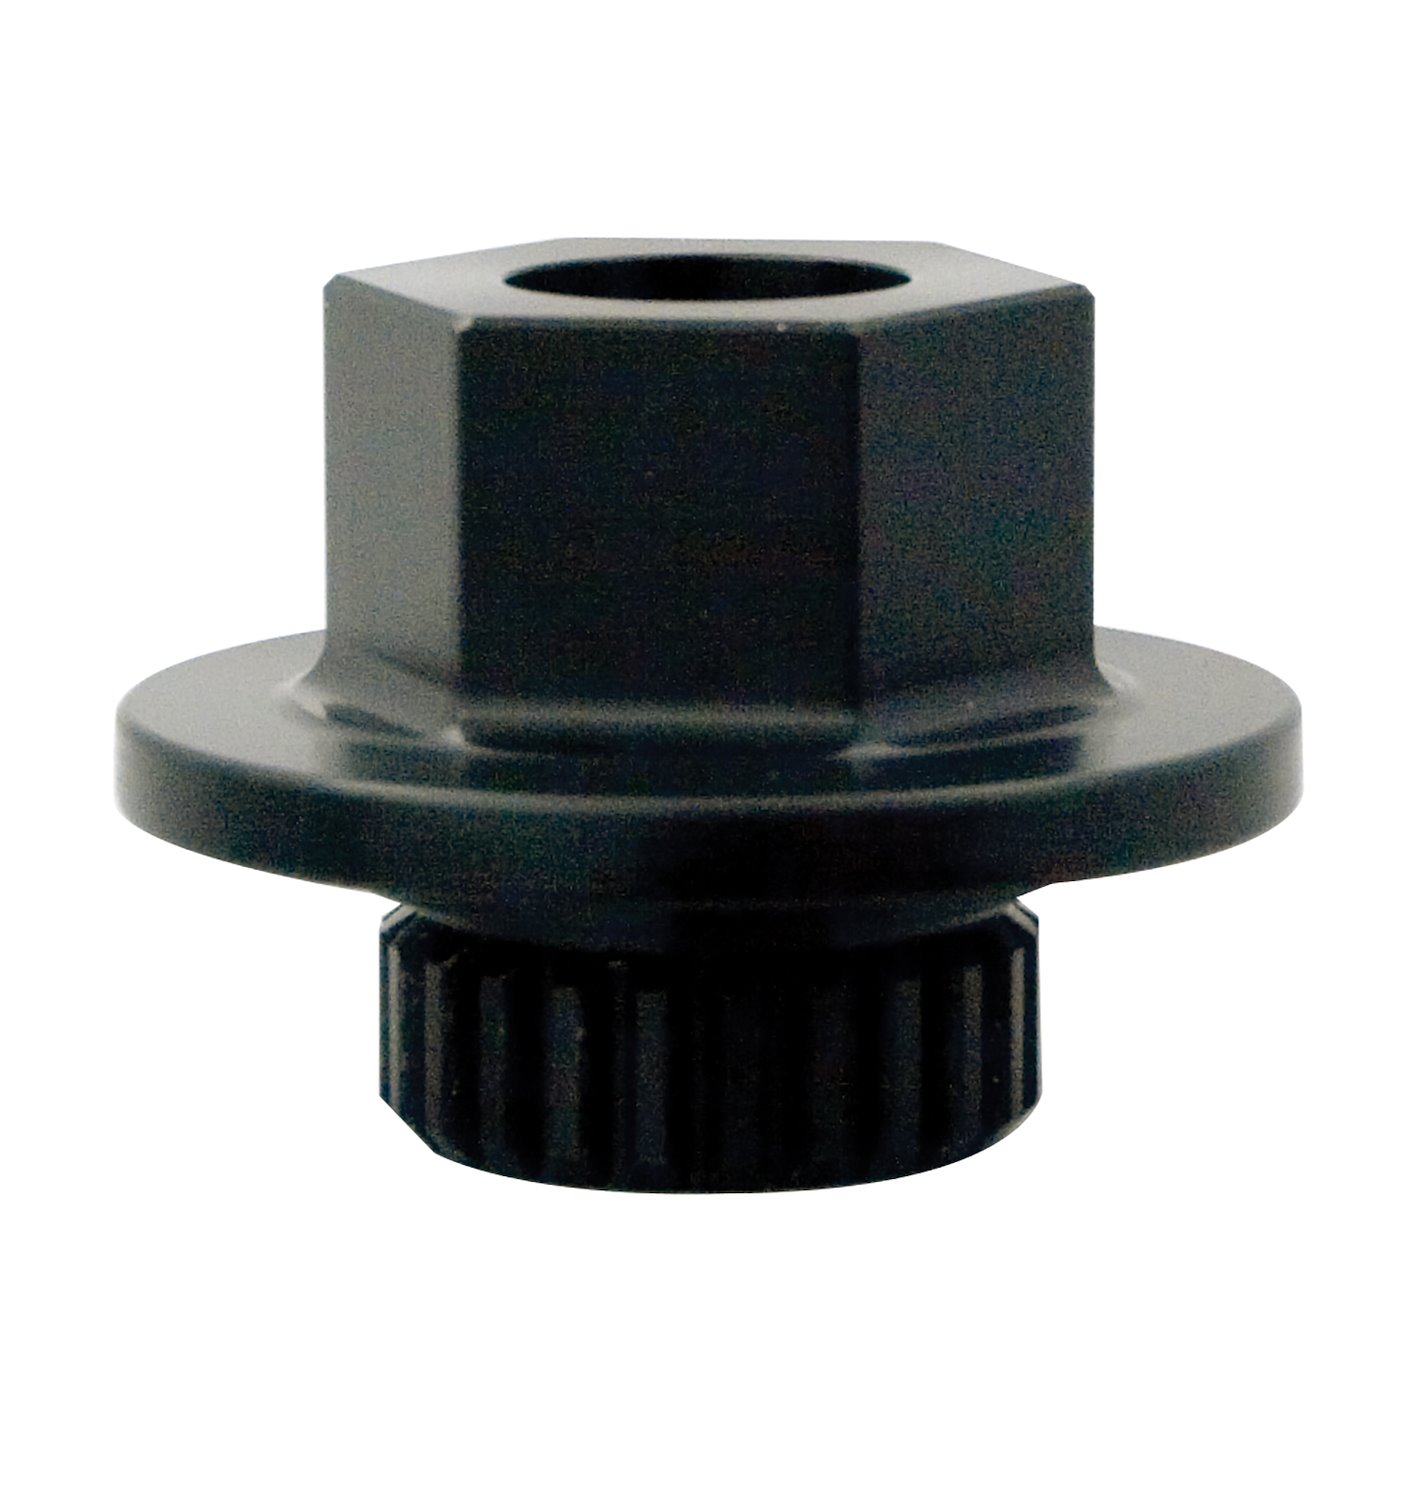 DRIVE WASHER CAP NUT 2.750